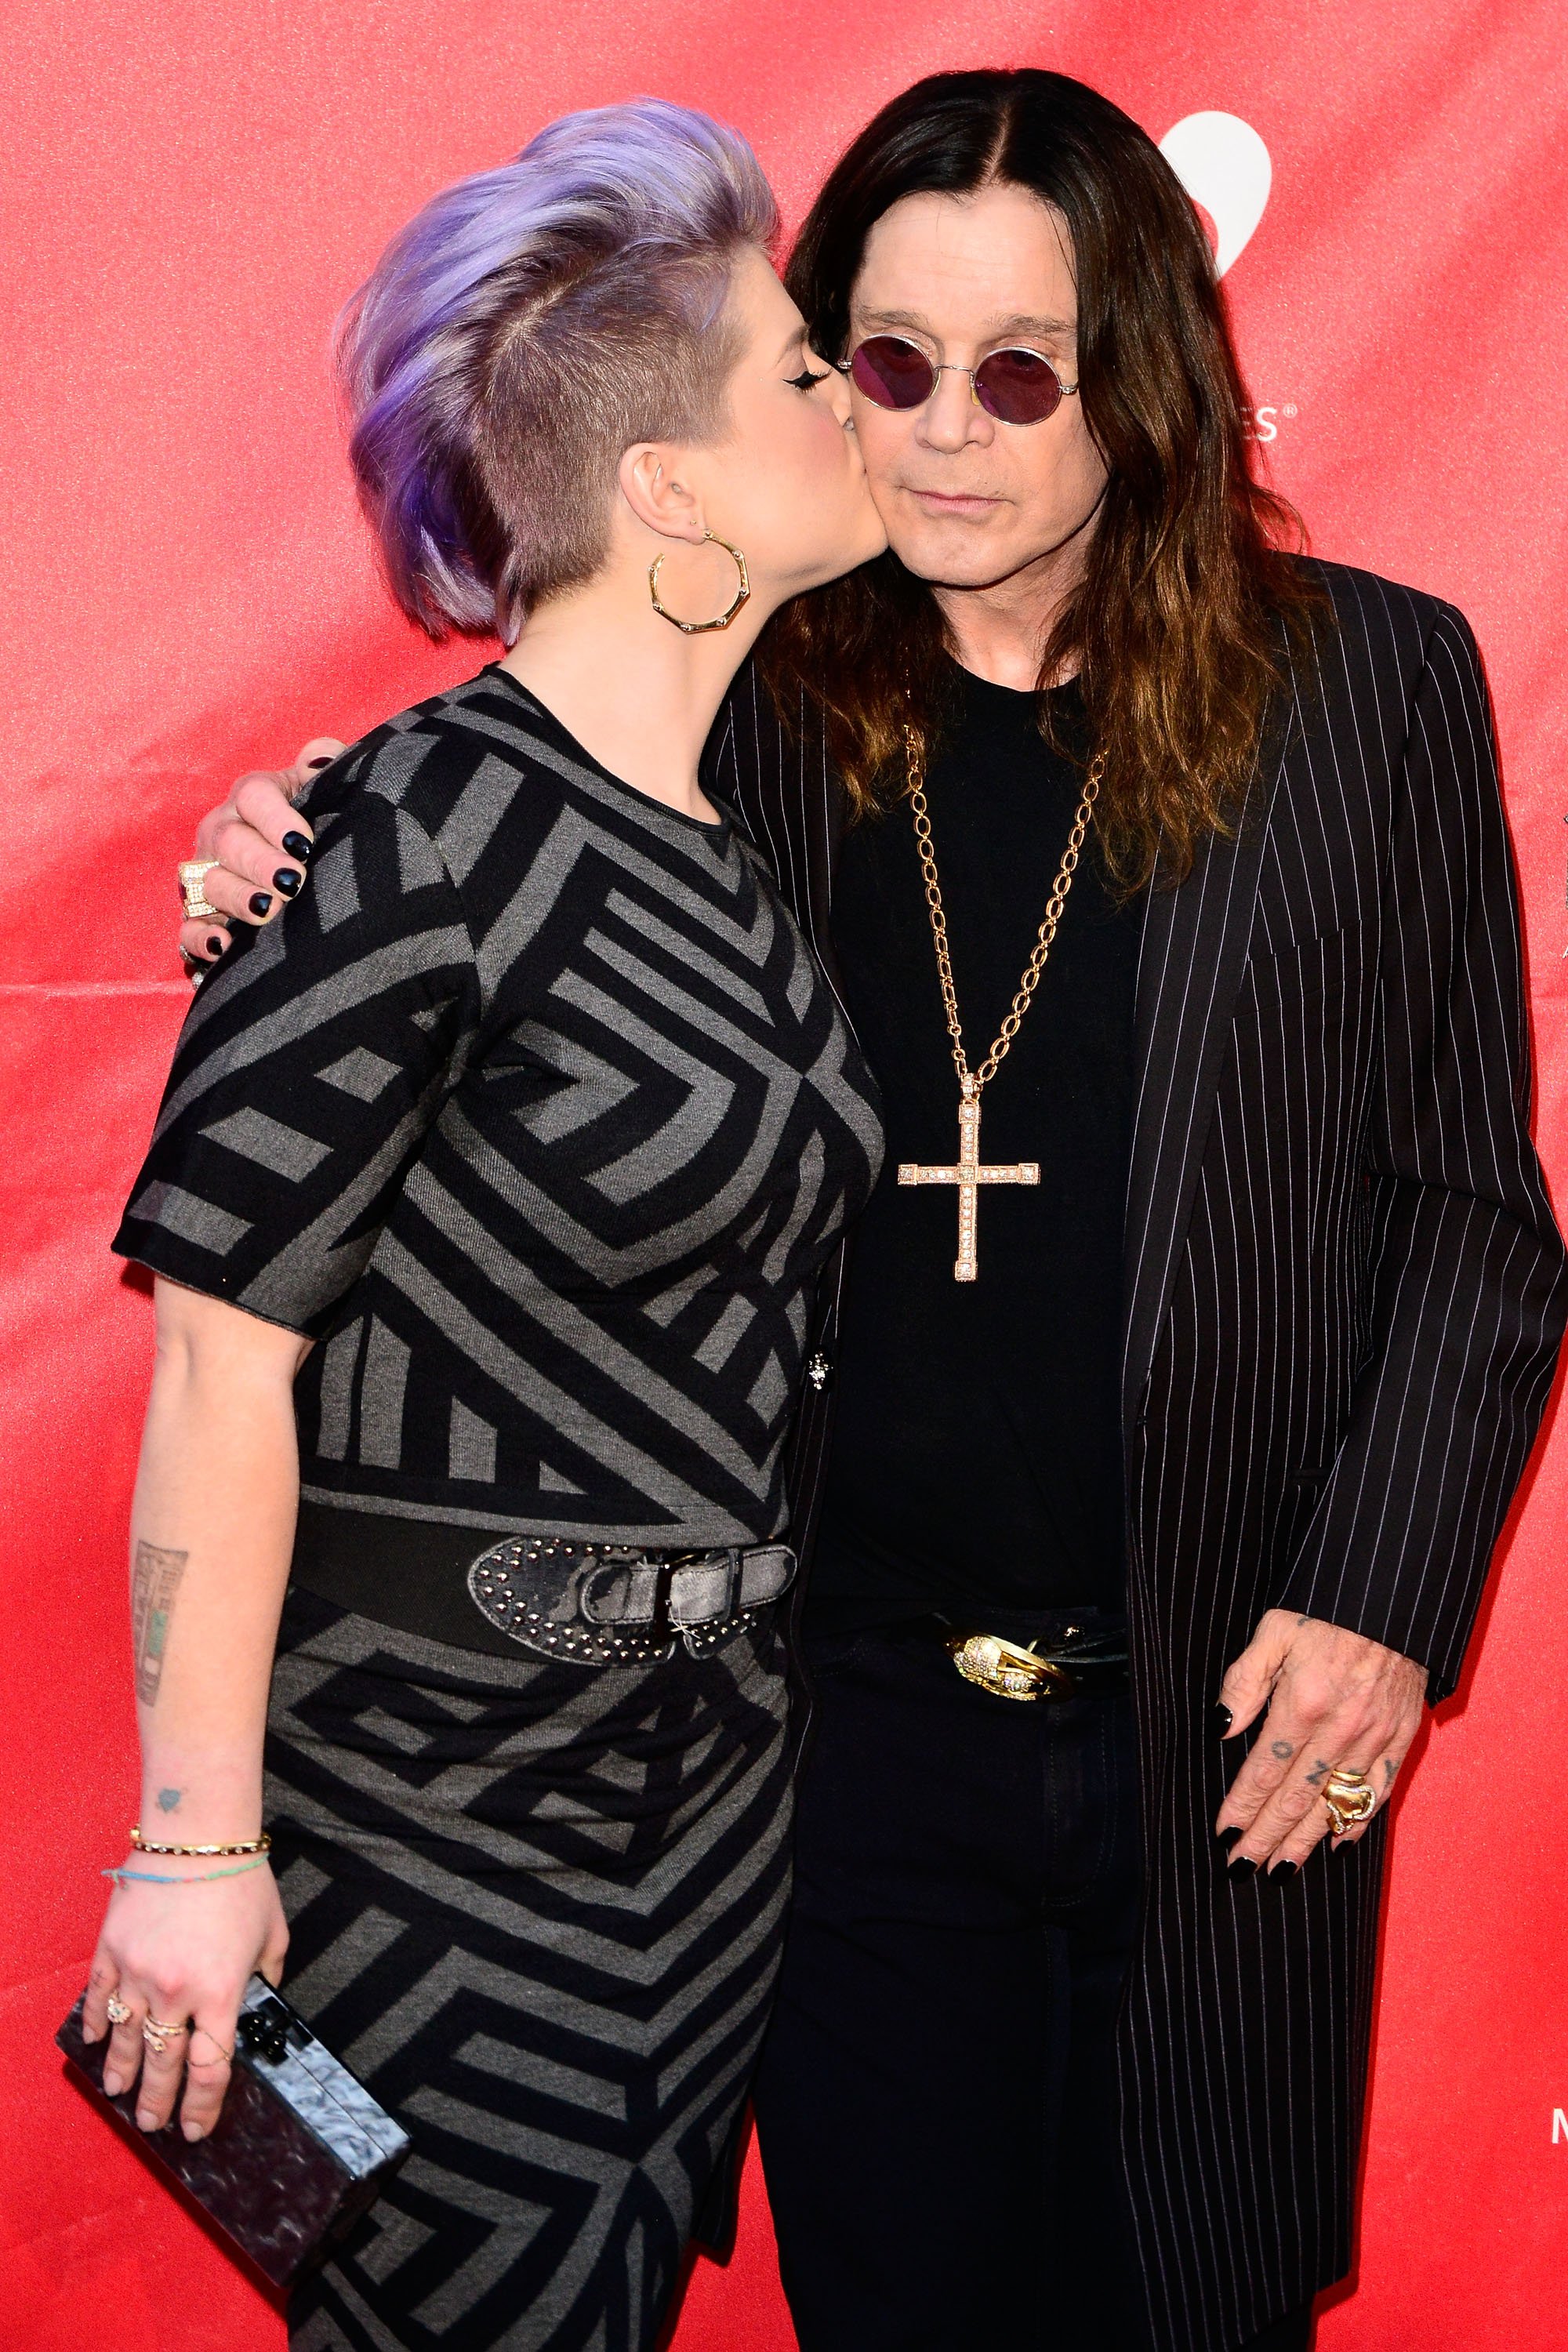 Kelly Osbourne and Ozzy Osbourne in Los Angeles in 2014. | Source: Getty Images